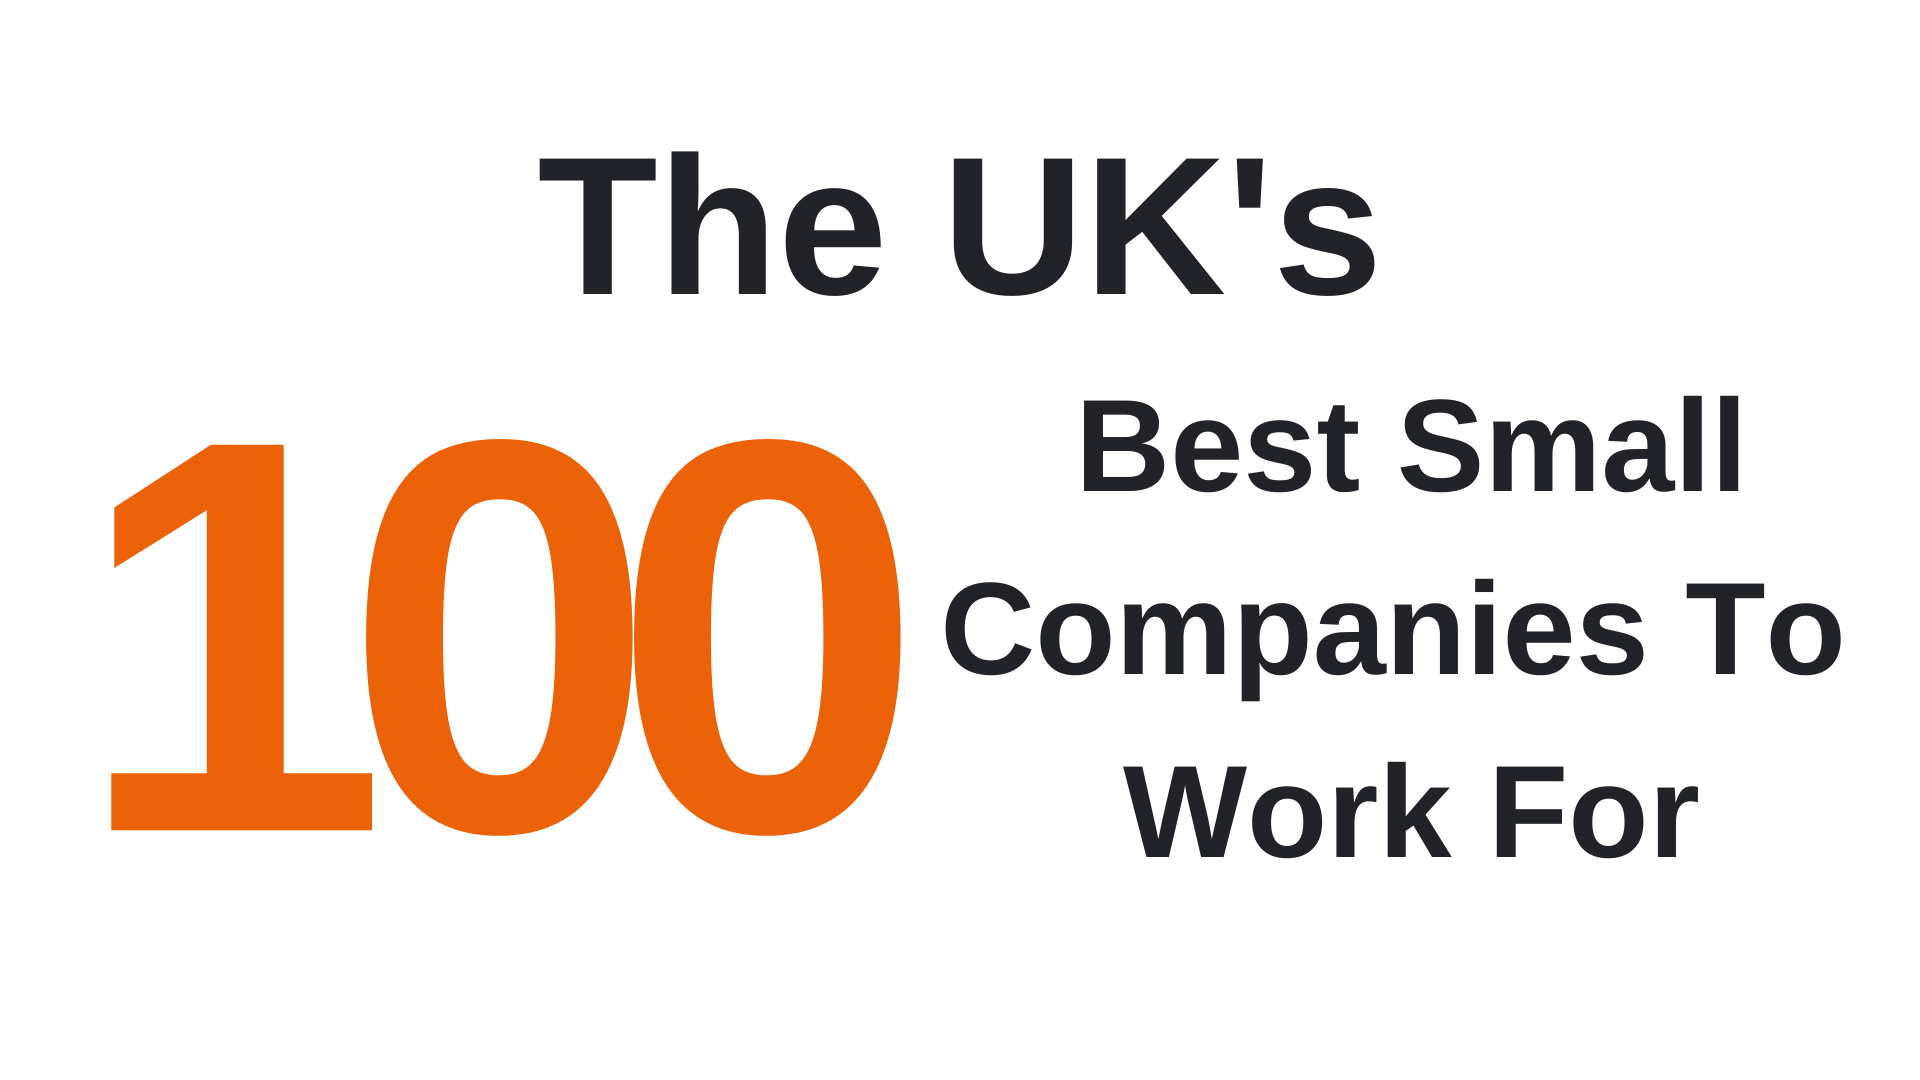 The UK's 100 Best Small Companies